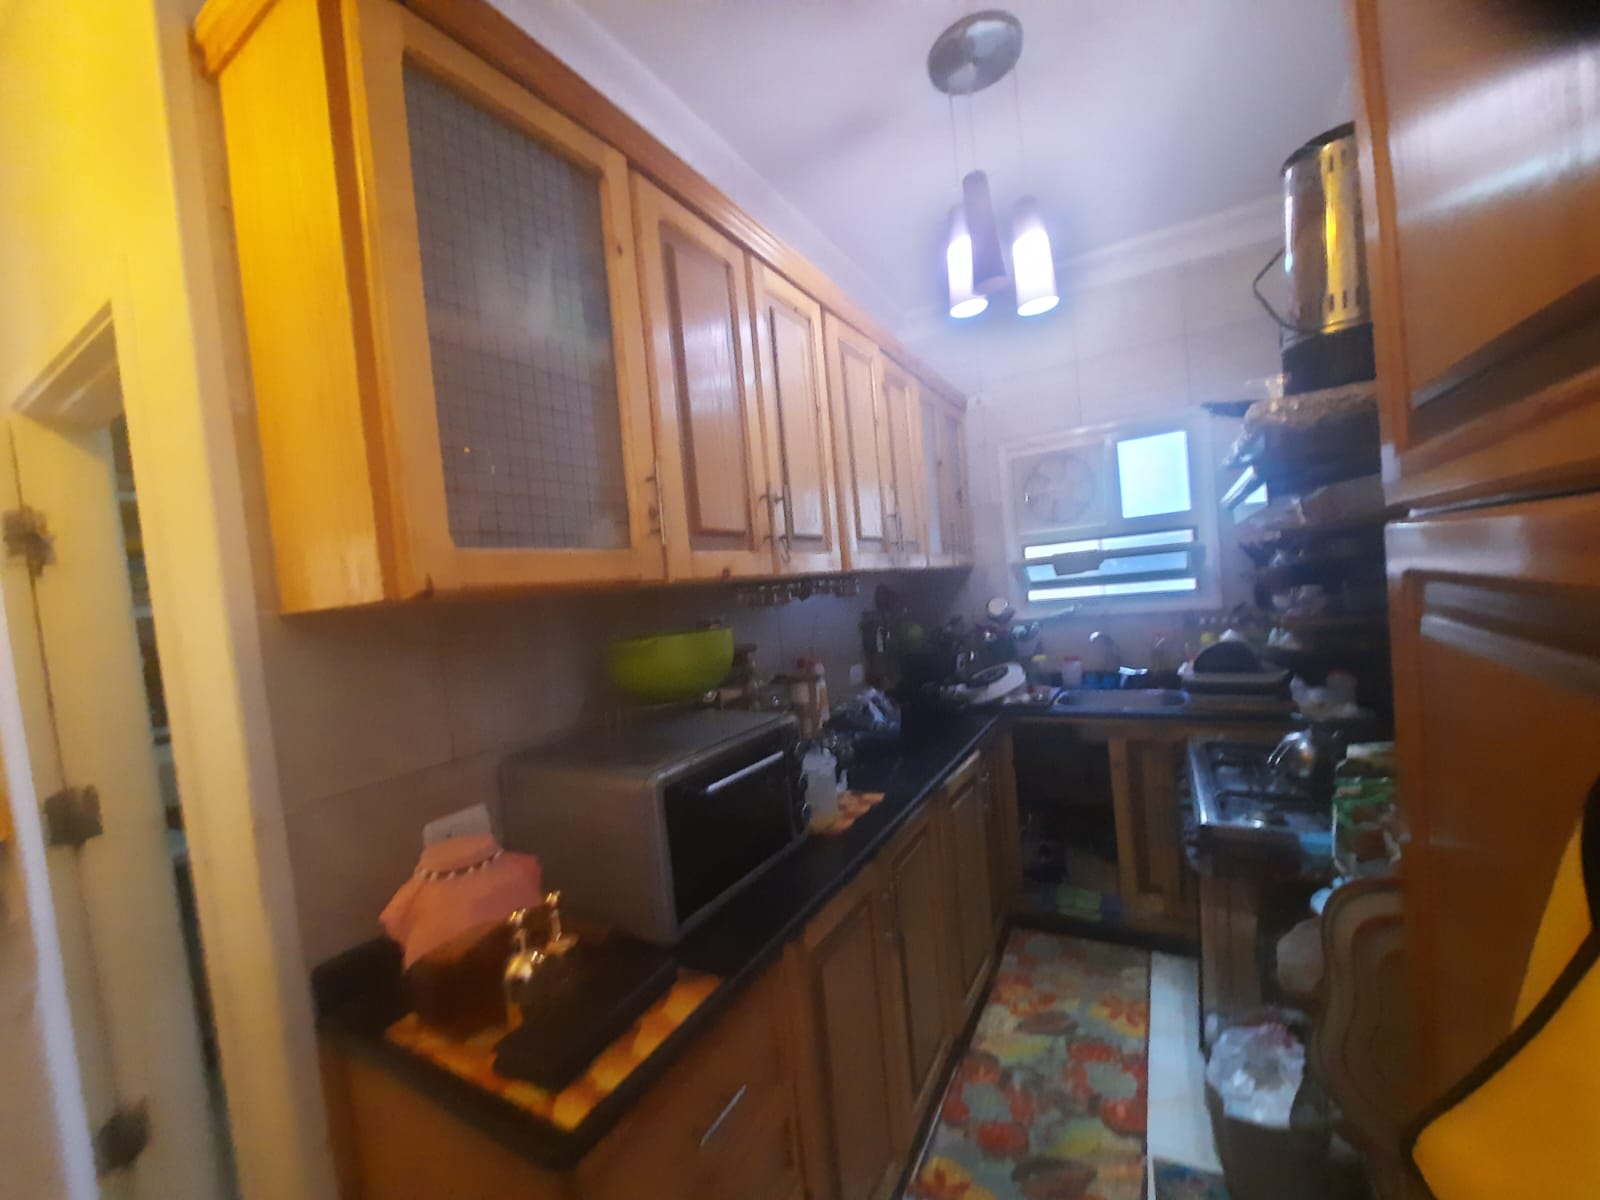 3 bedroom apartment in new kawther